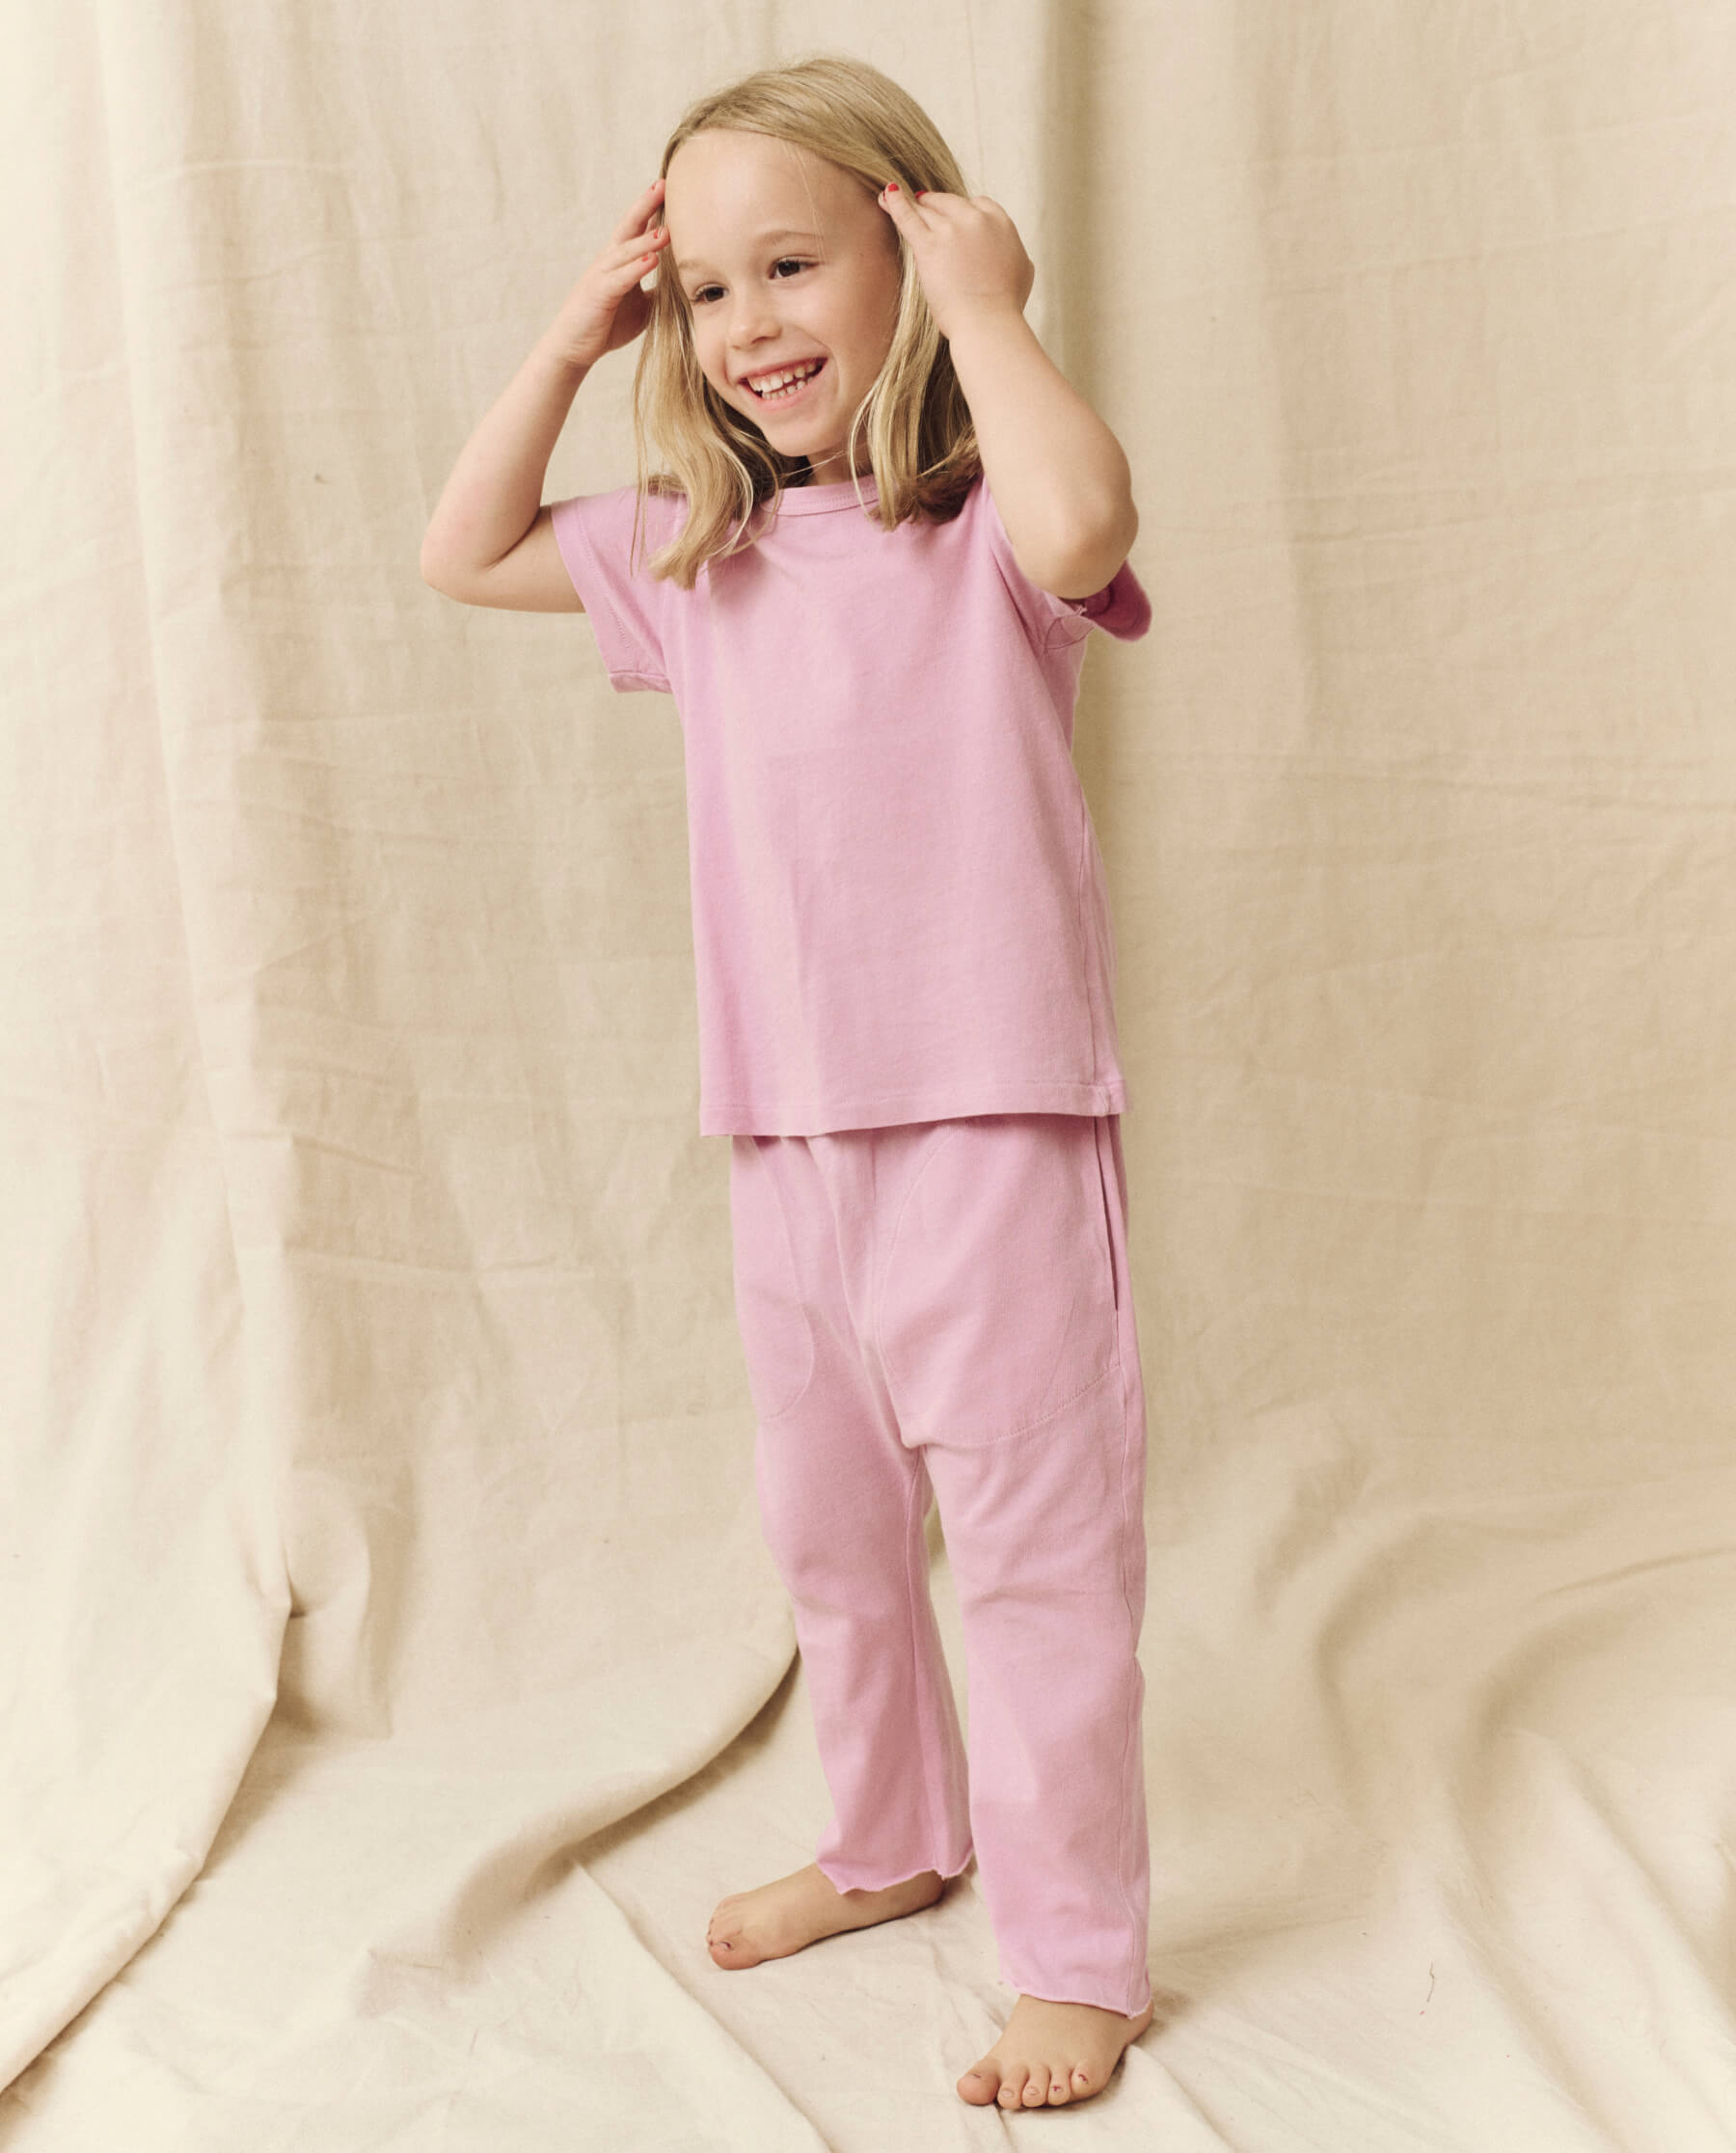 The Little Jersey Crop. Solid -- Lilac Blossom SWEATPANTS THE GREAT. SP24 LITTLE